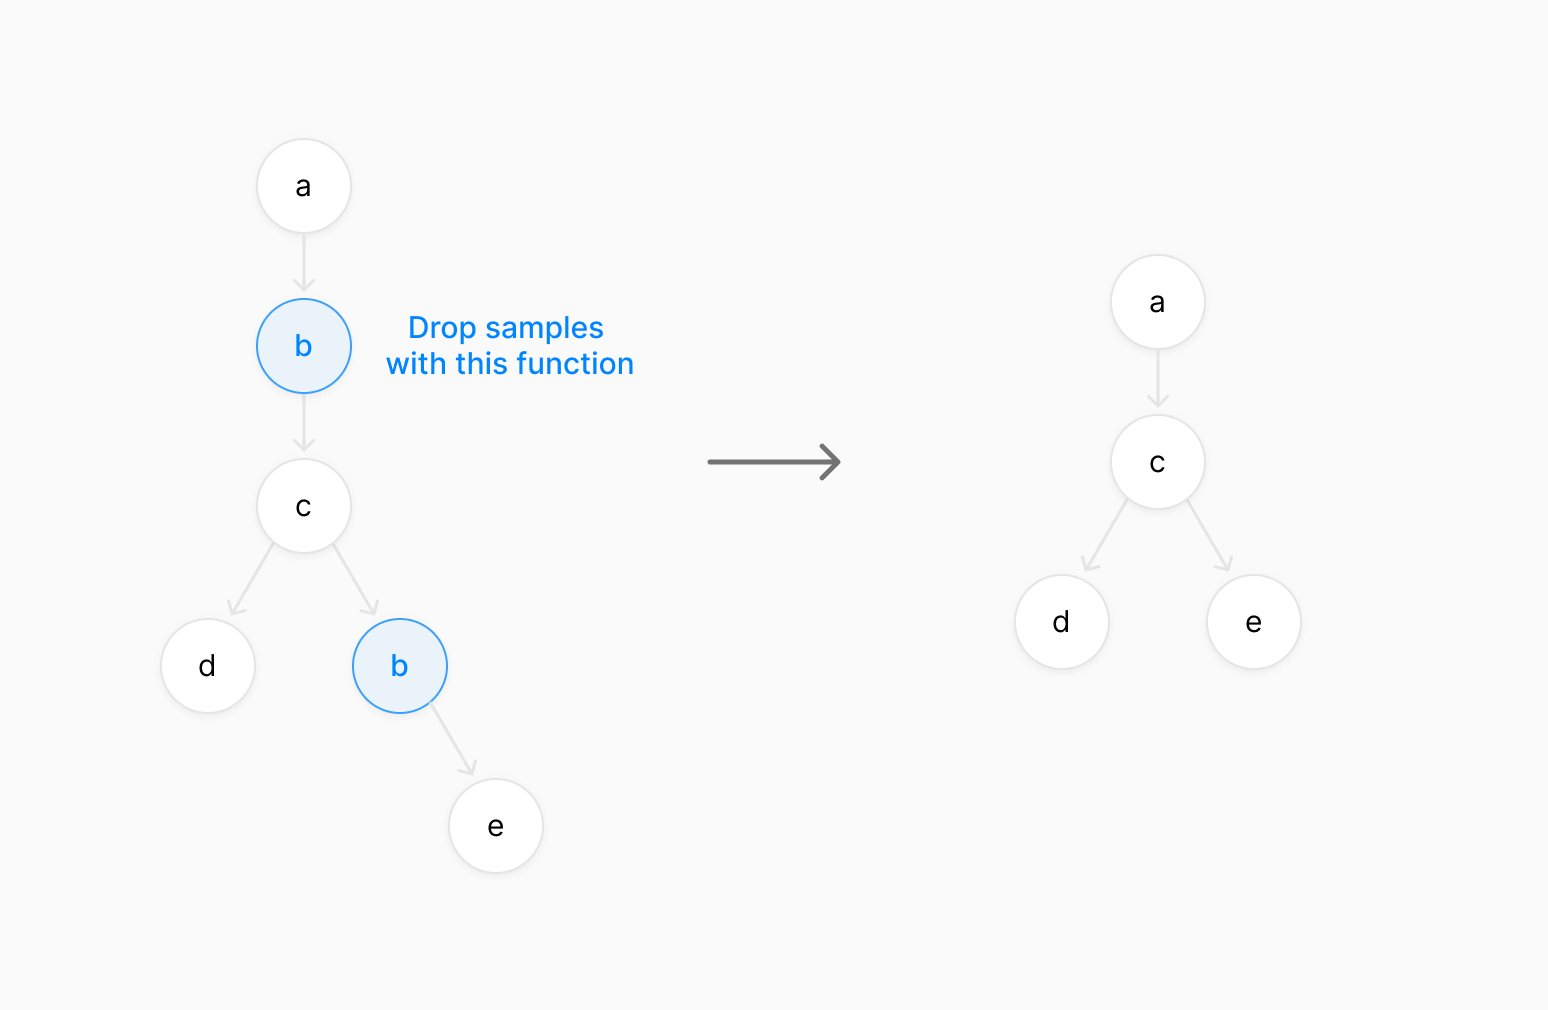 Drop samples with this function diagram